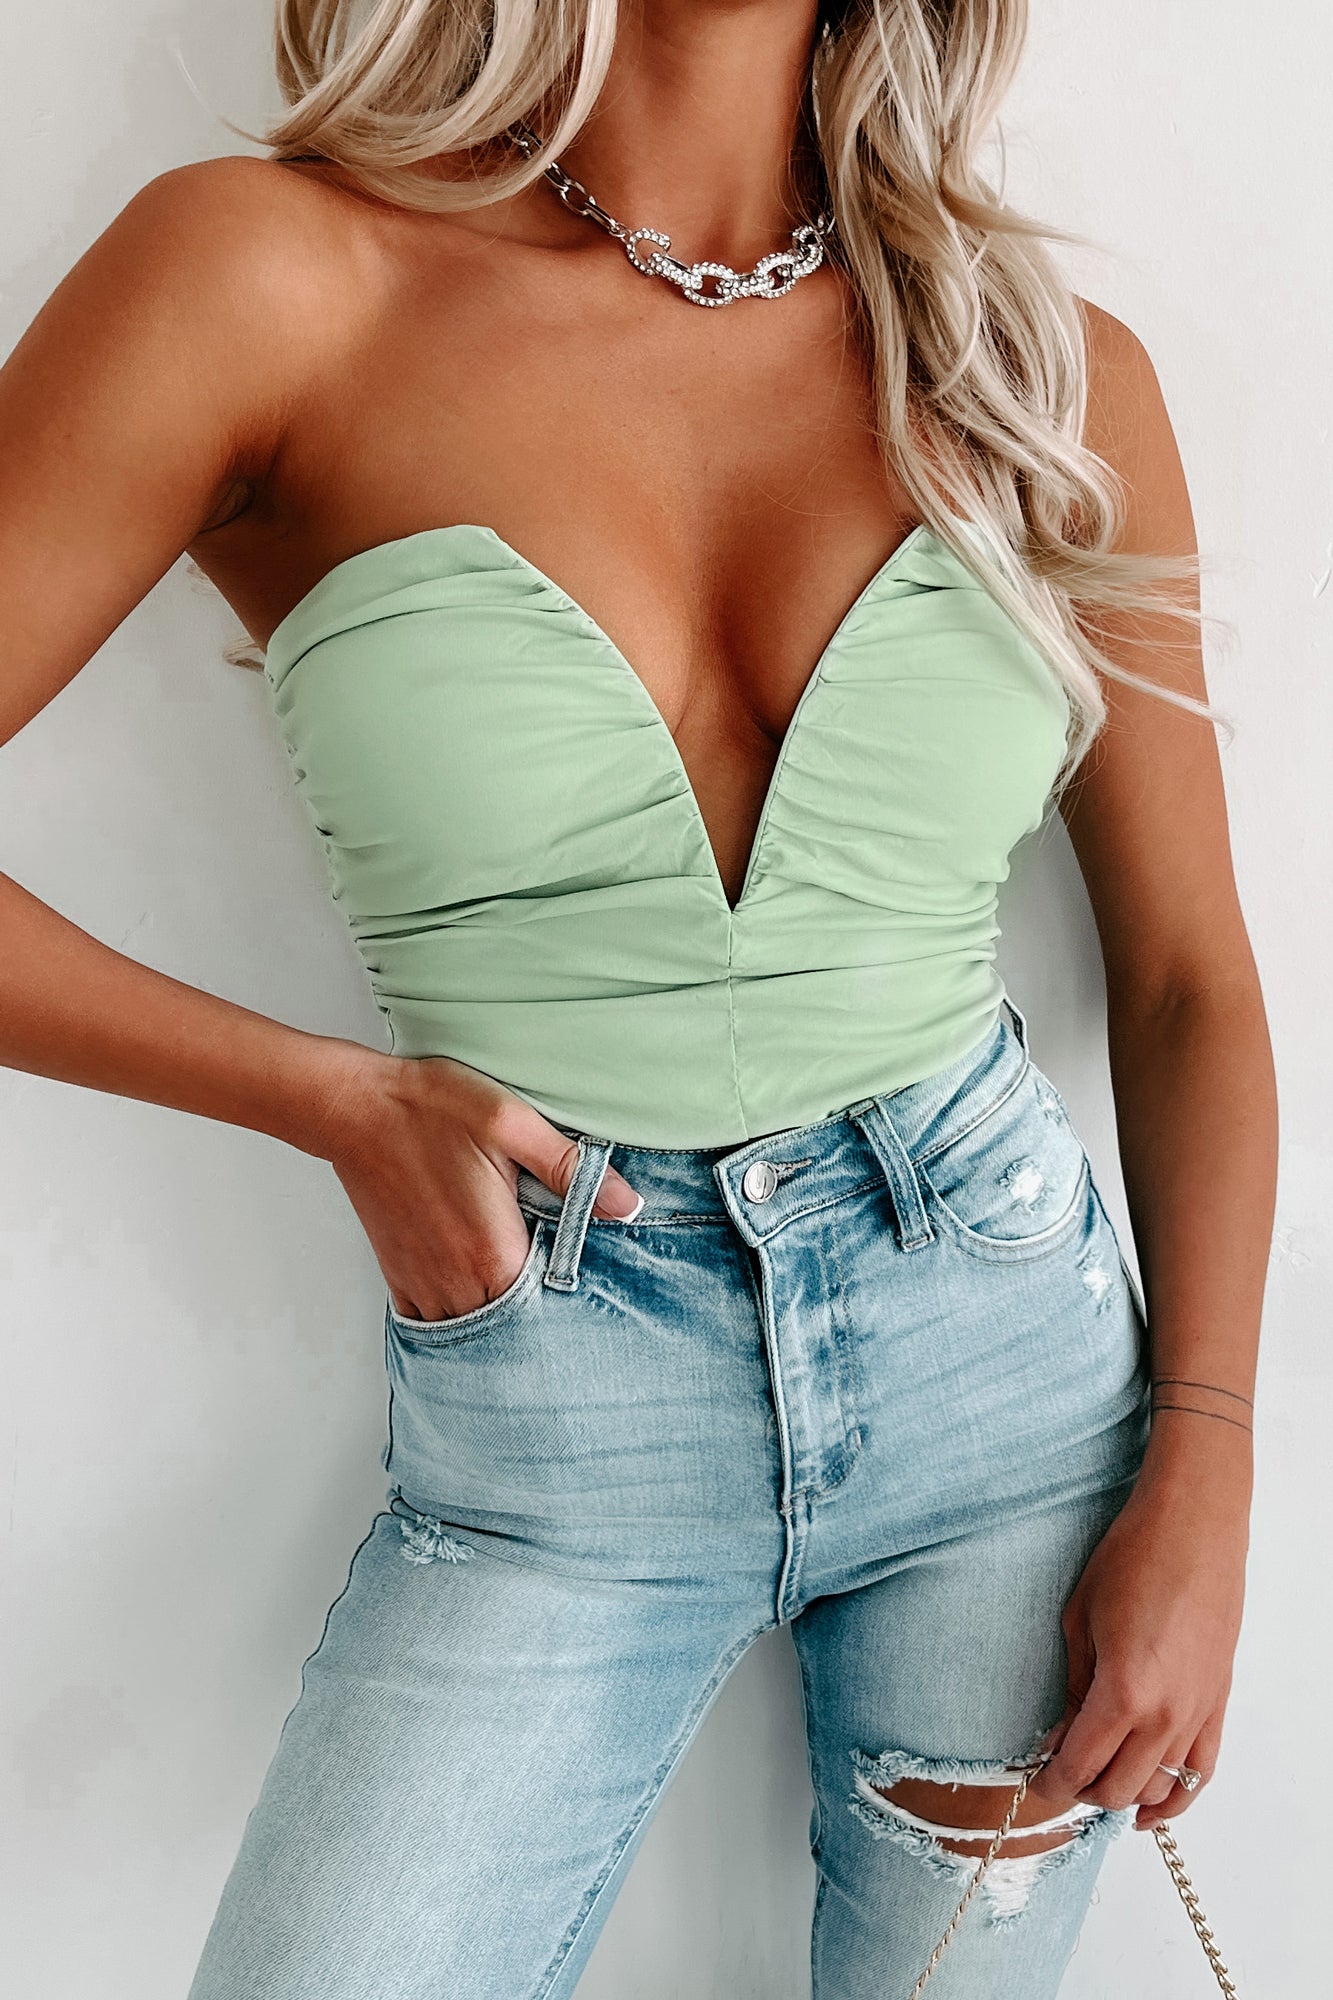 Out Of Your League Strapless Deep V Bodysuit (Green) - NanaMacs